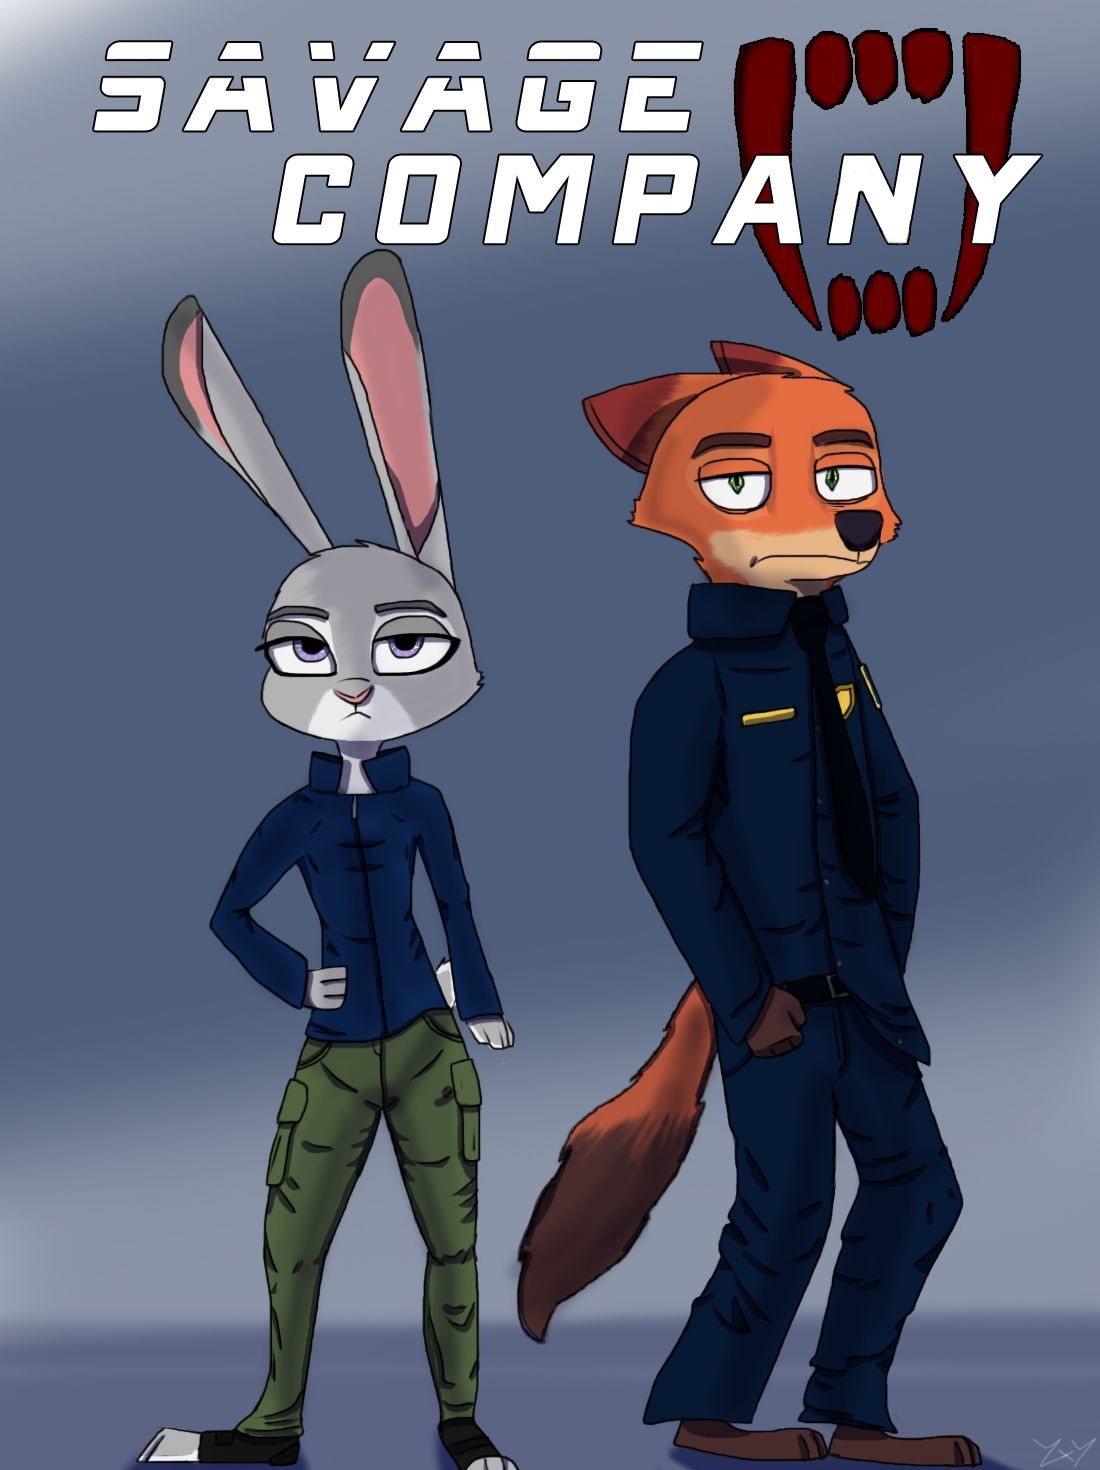 Real Orgasms [yitexity] Savage Company (Zootopia)[Ongoing] Free Fuck Clips